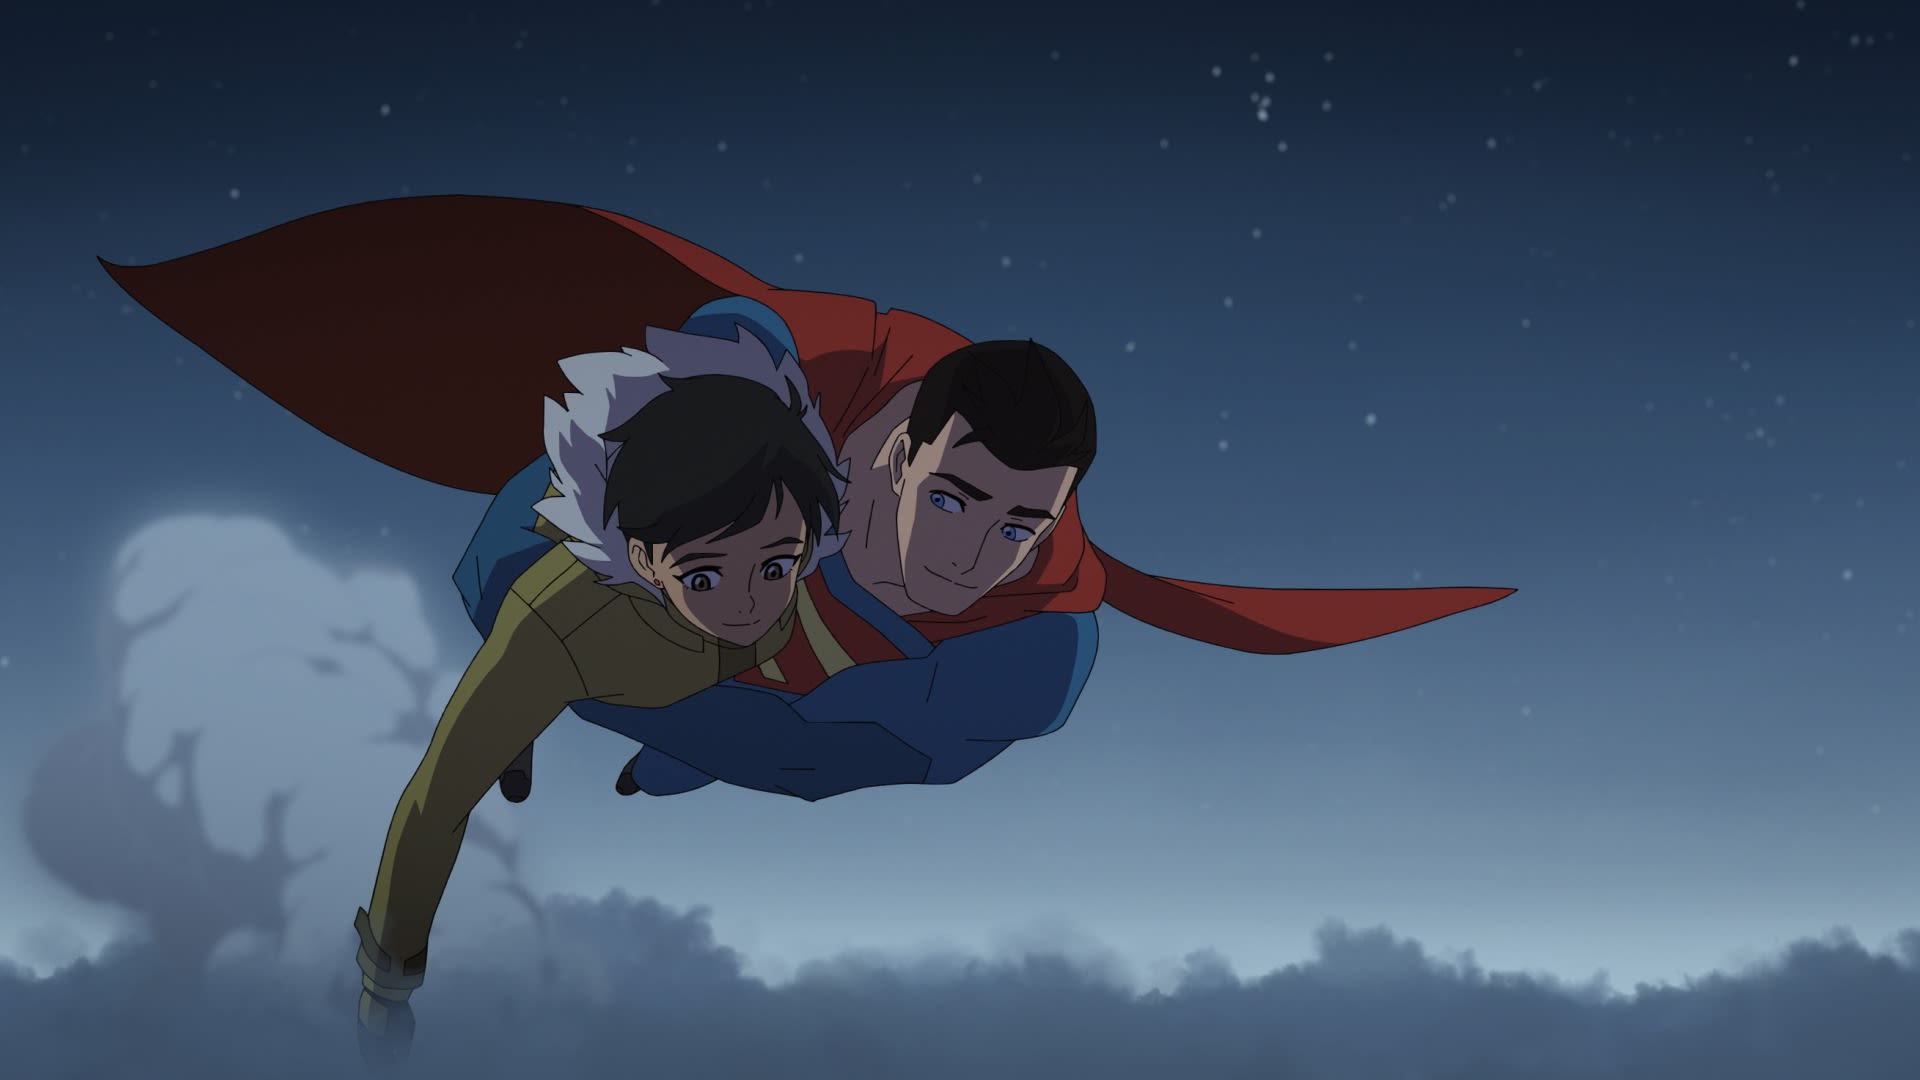 Smiling Friends, My Adventures with Superman, Get Jiro: Series Orders and Renewals Set by Adult Swim